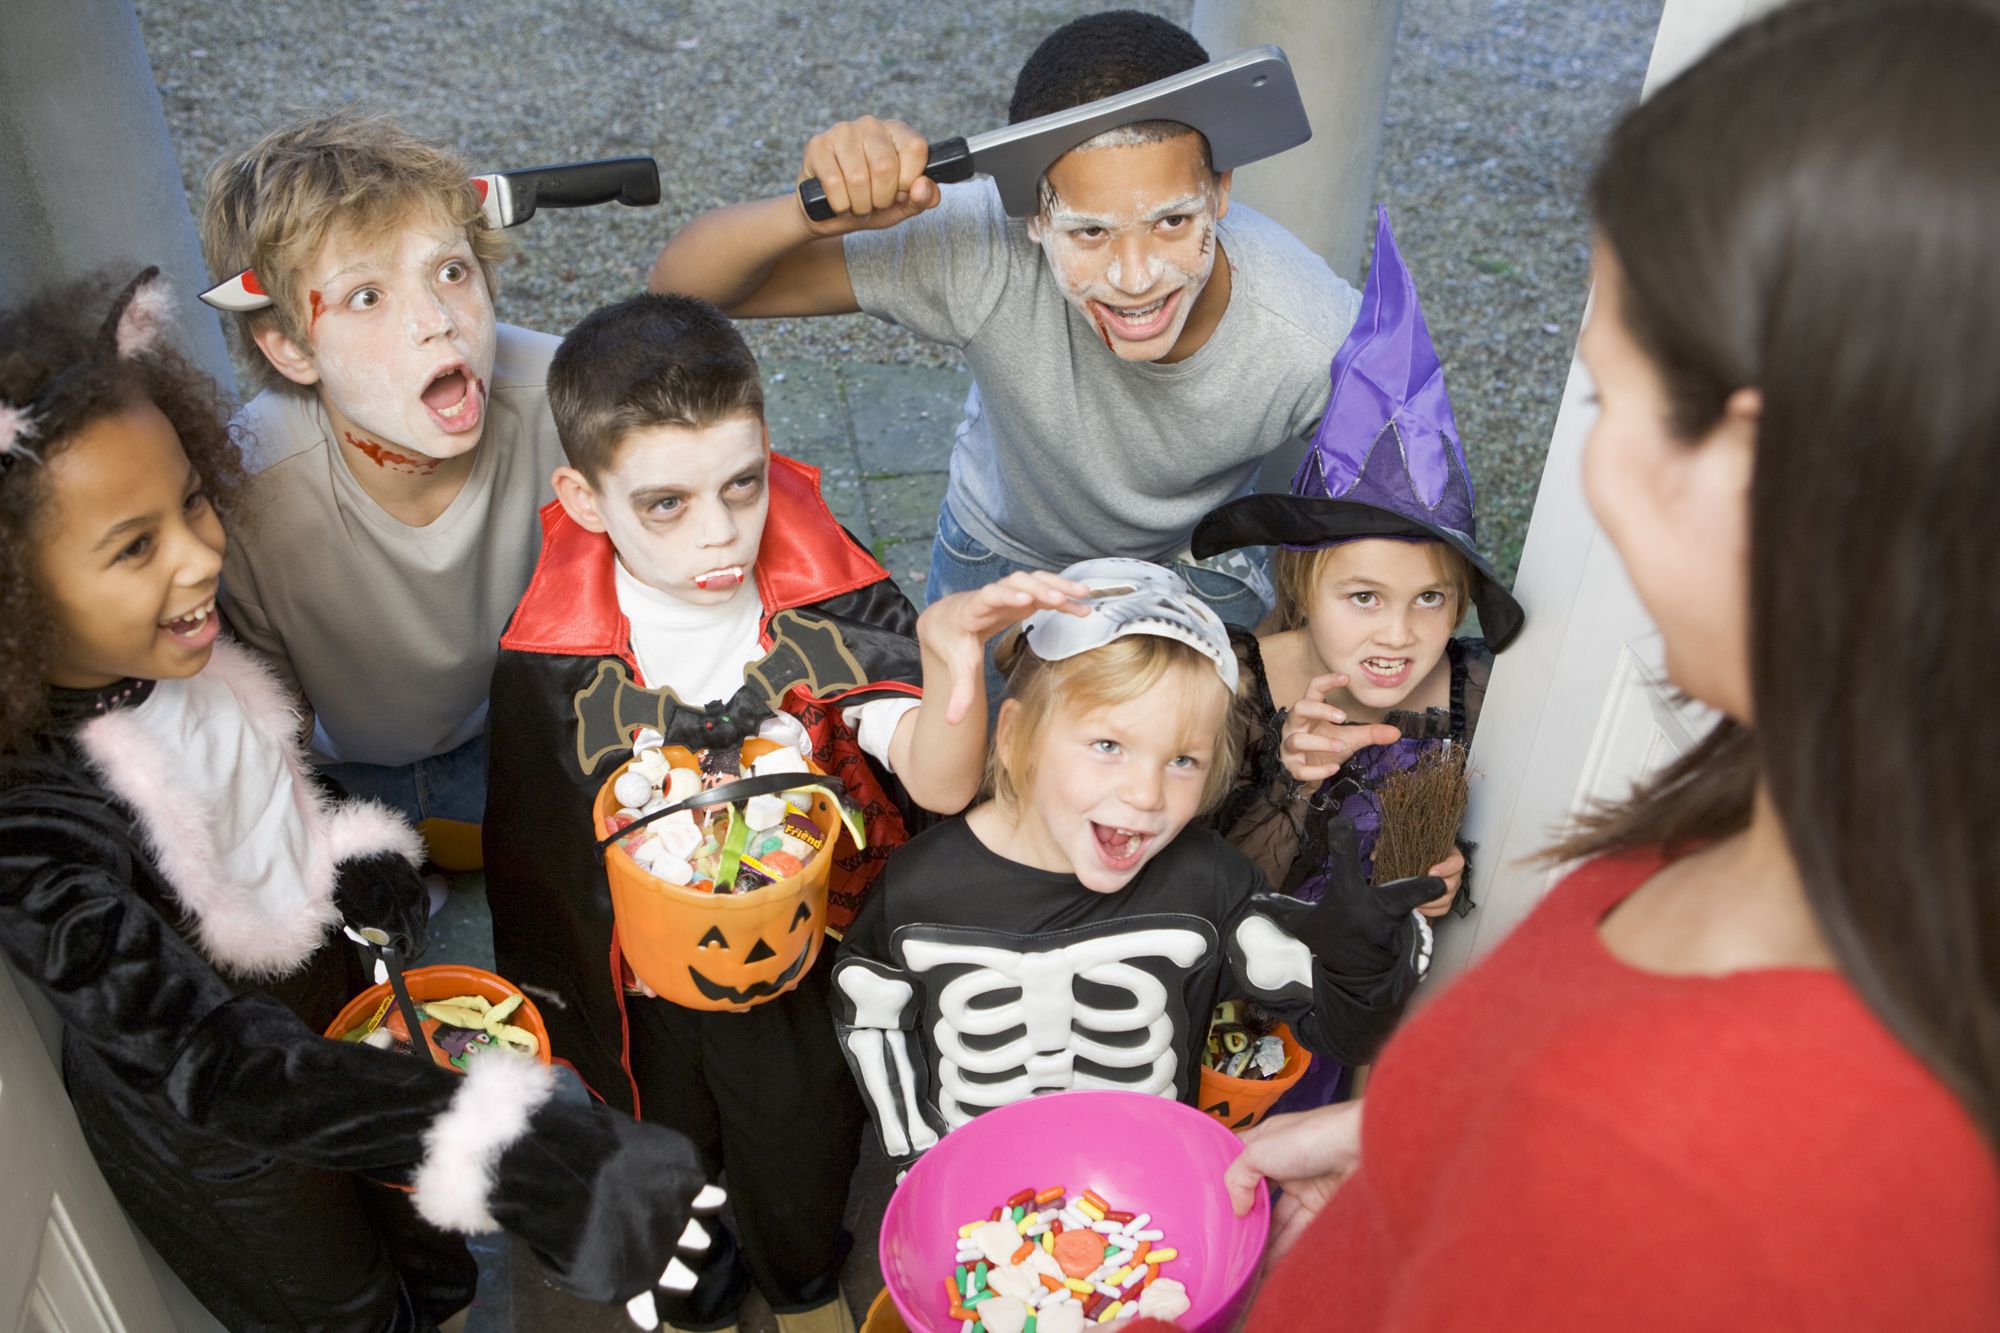 A Step-By-Step Guide To Trick-Or-Treating | Trick-or-Treating Costumes For Kids